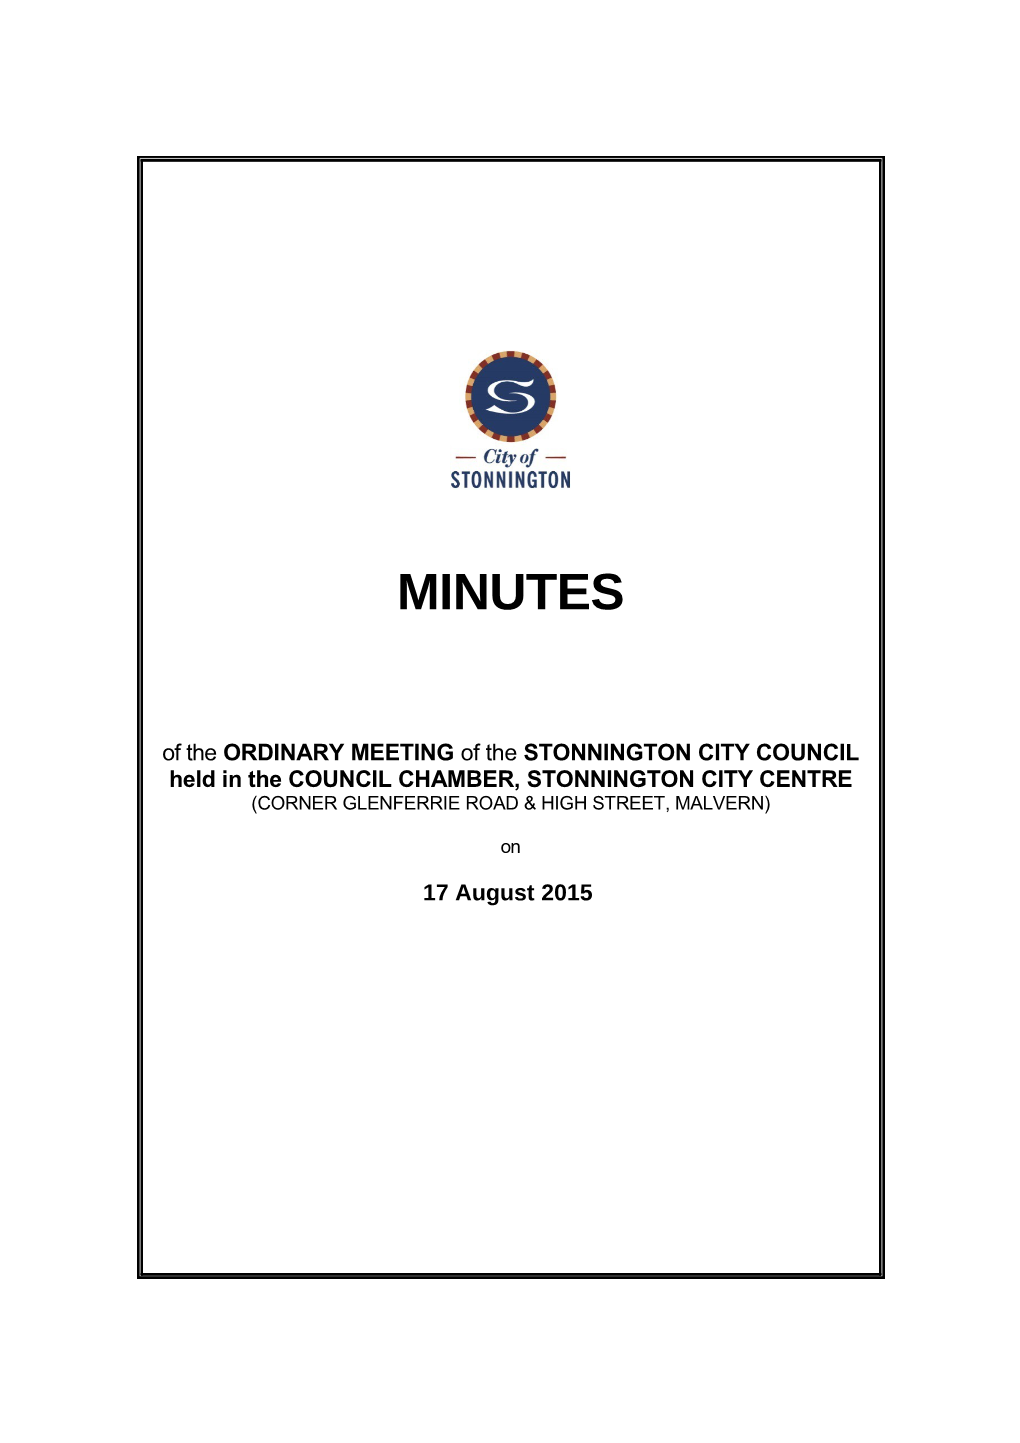 Minutes of Council Meeting - 17 August 2015